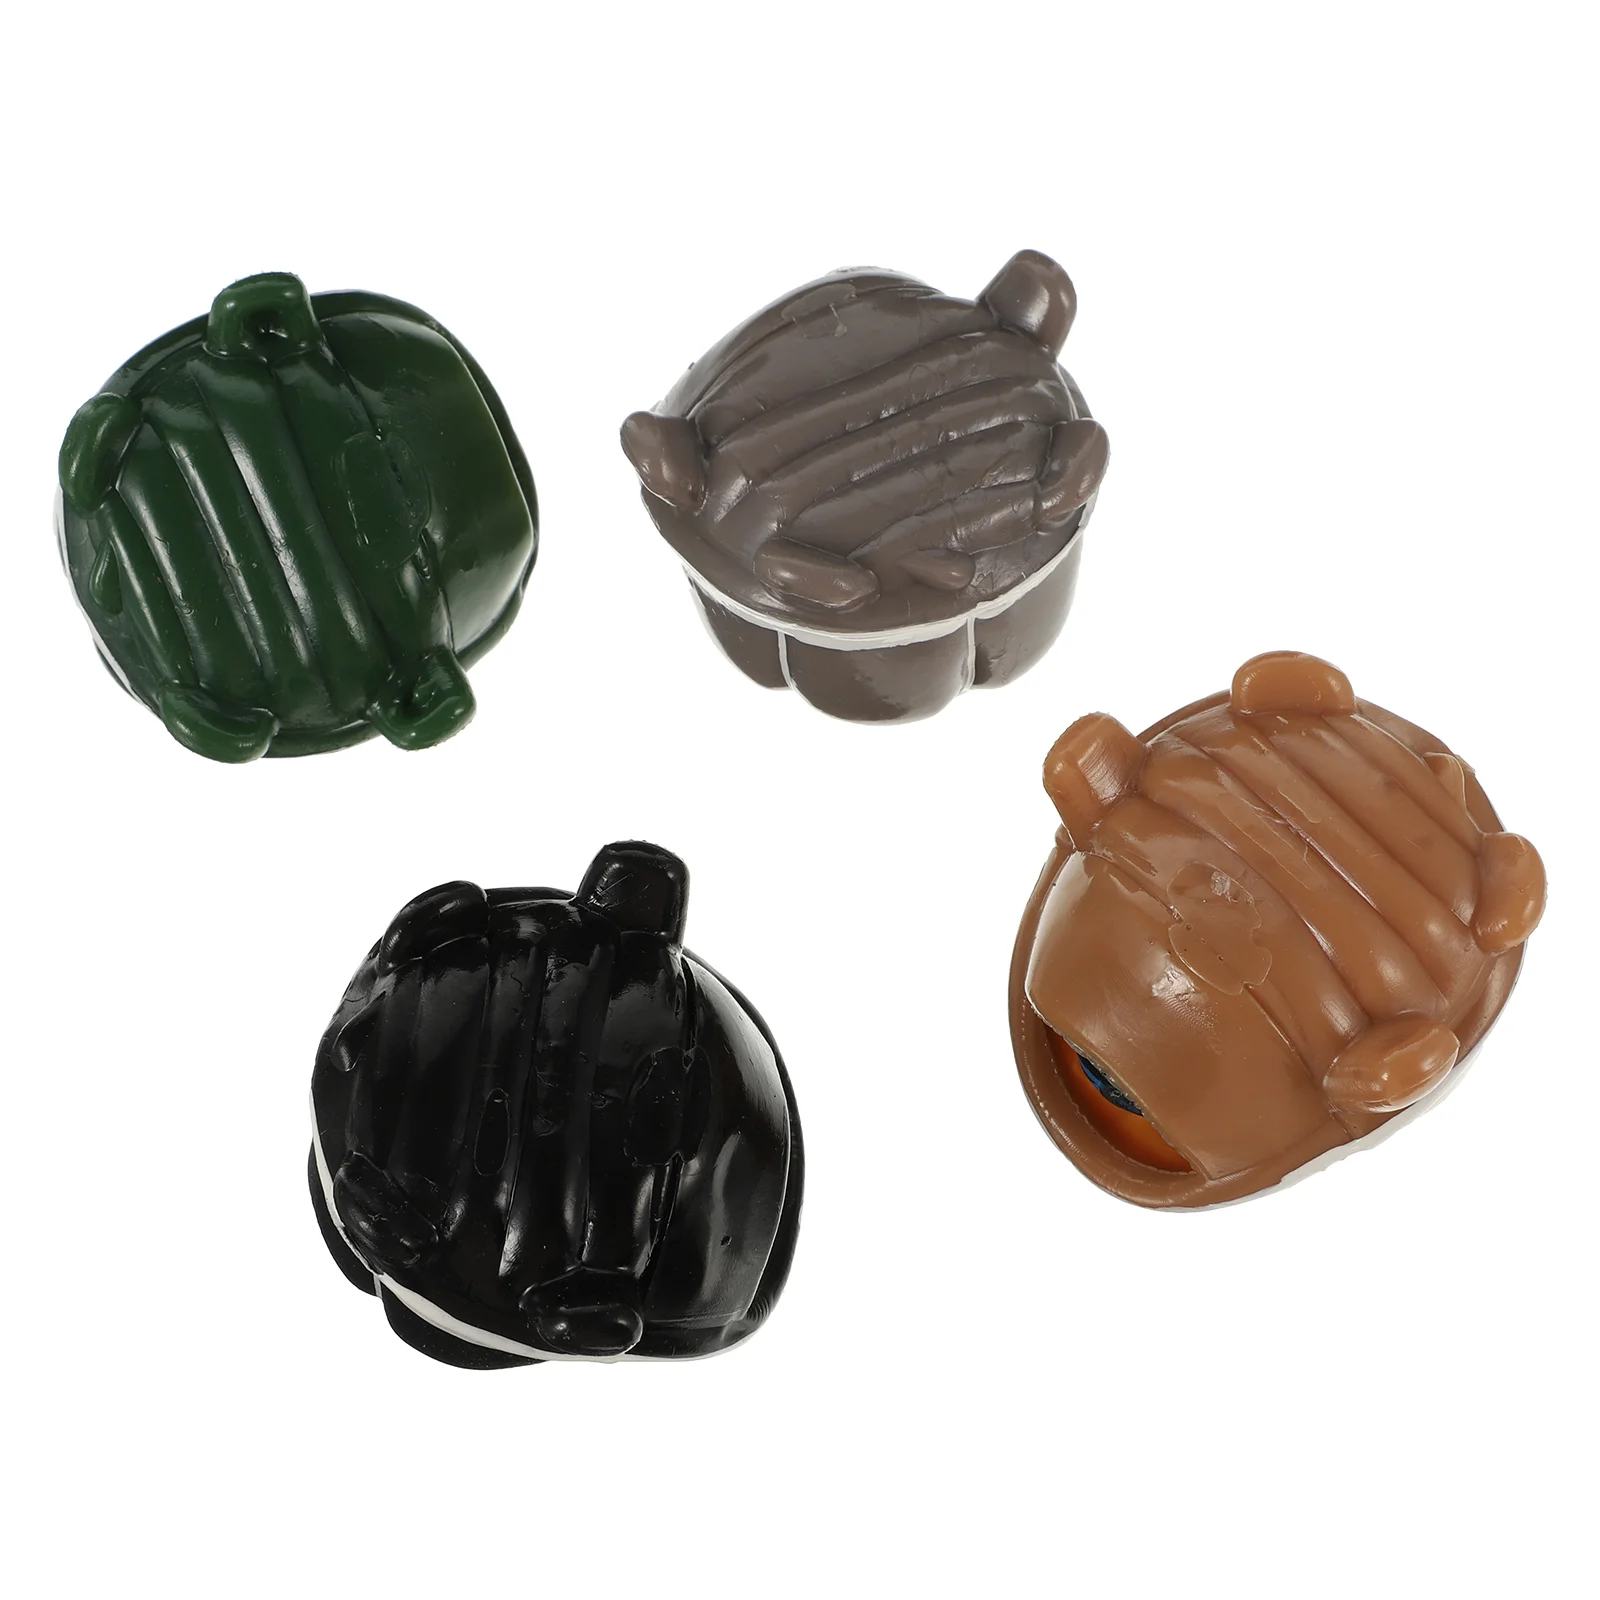 

4 Pcs Vent Toy Toys Squeeze Stretchy Simulation Turtle Plaything Plastic Pressure Relief Tricky Student